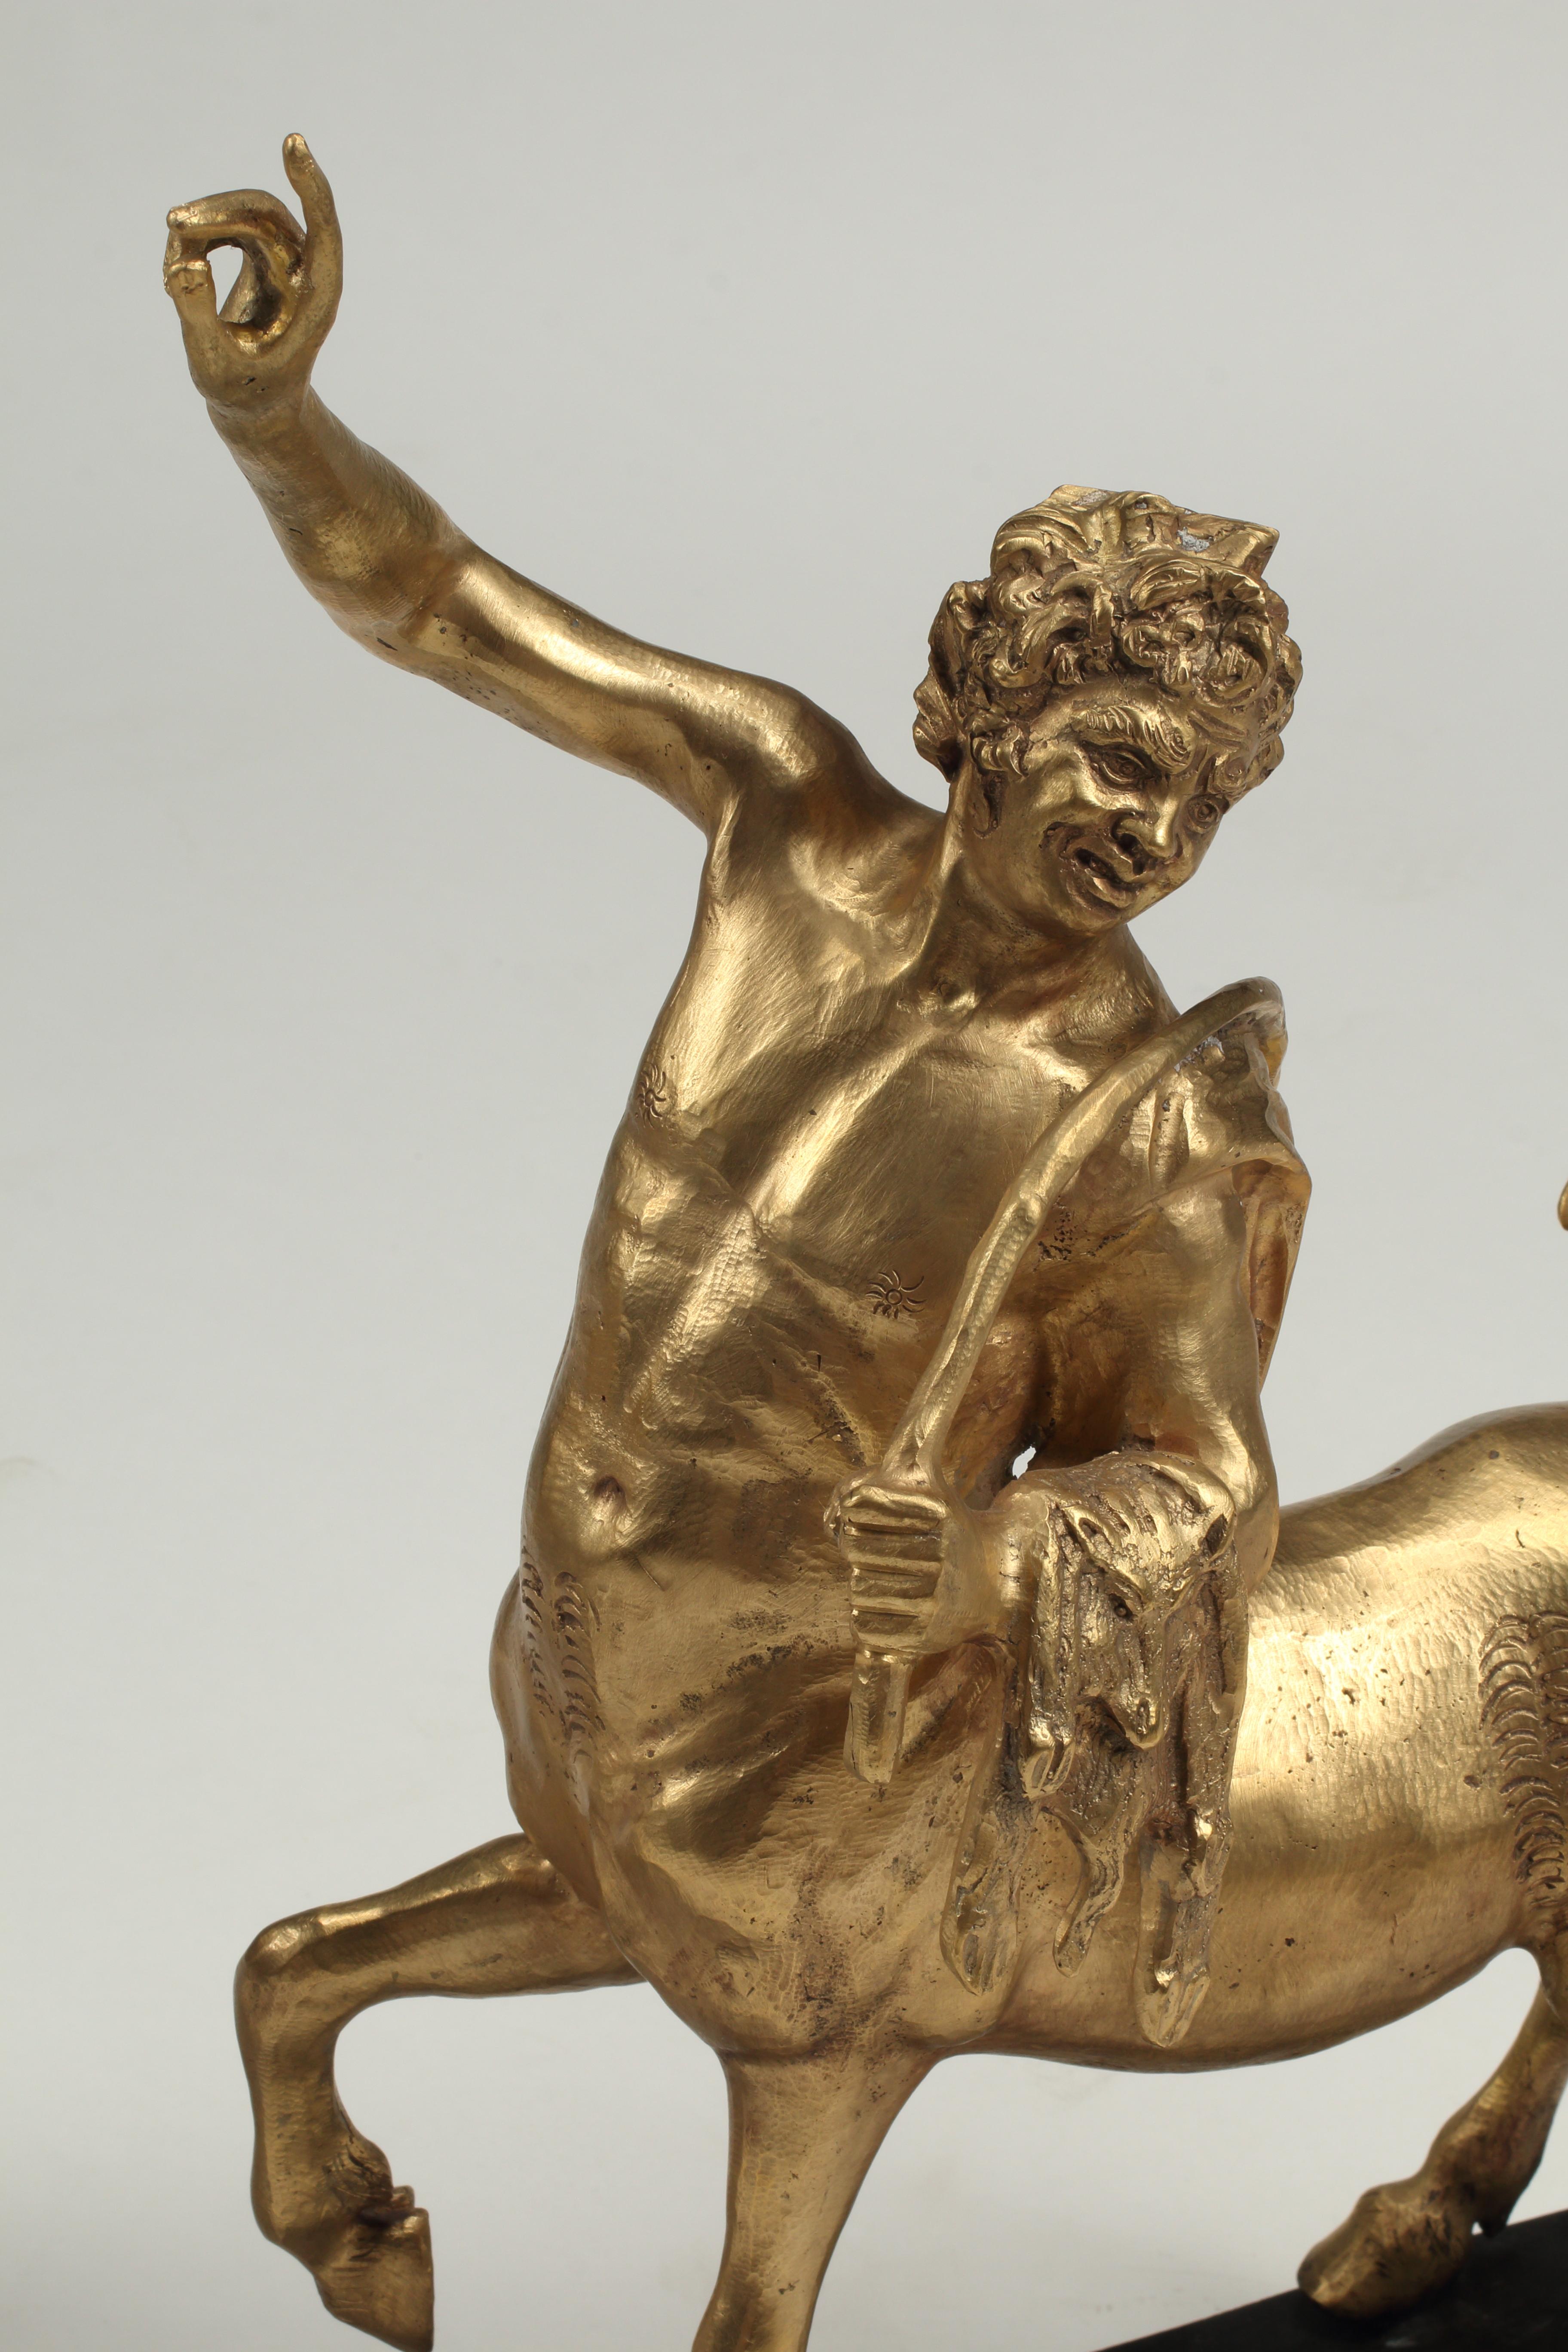 An excellent pair of opposing dore bronze Furietti Centaur reductions of those that were excavated at Hadrian’s Villa in Tivoli in 1735. 

The models are named after Giuseppe Furietti (1685-1764), the cardinal and antiquarian who discovered the